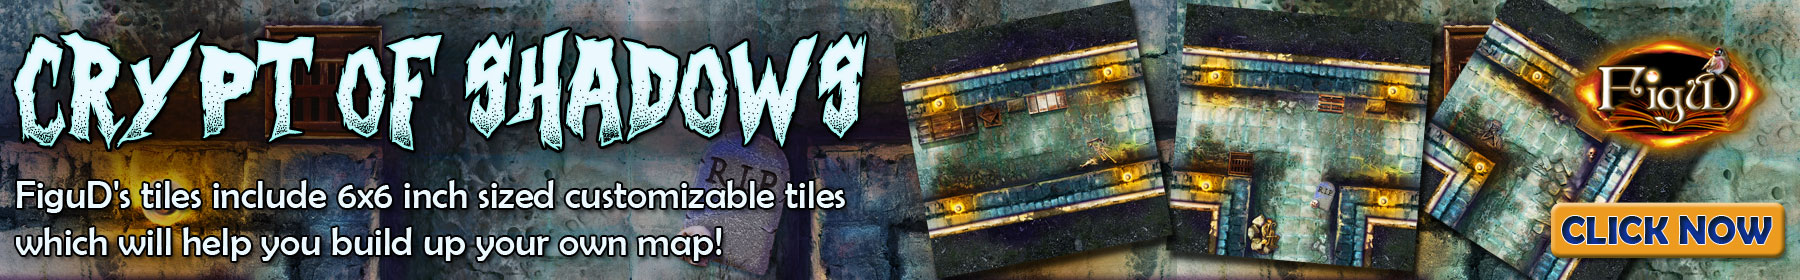 FiguD's Tiles1 - Crypt of shadows